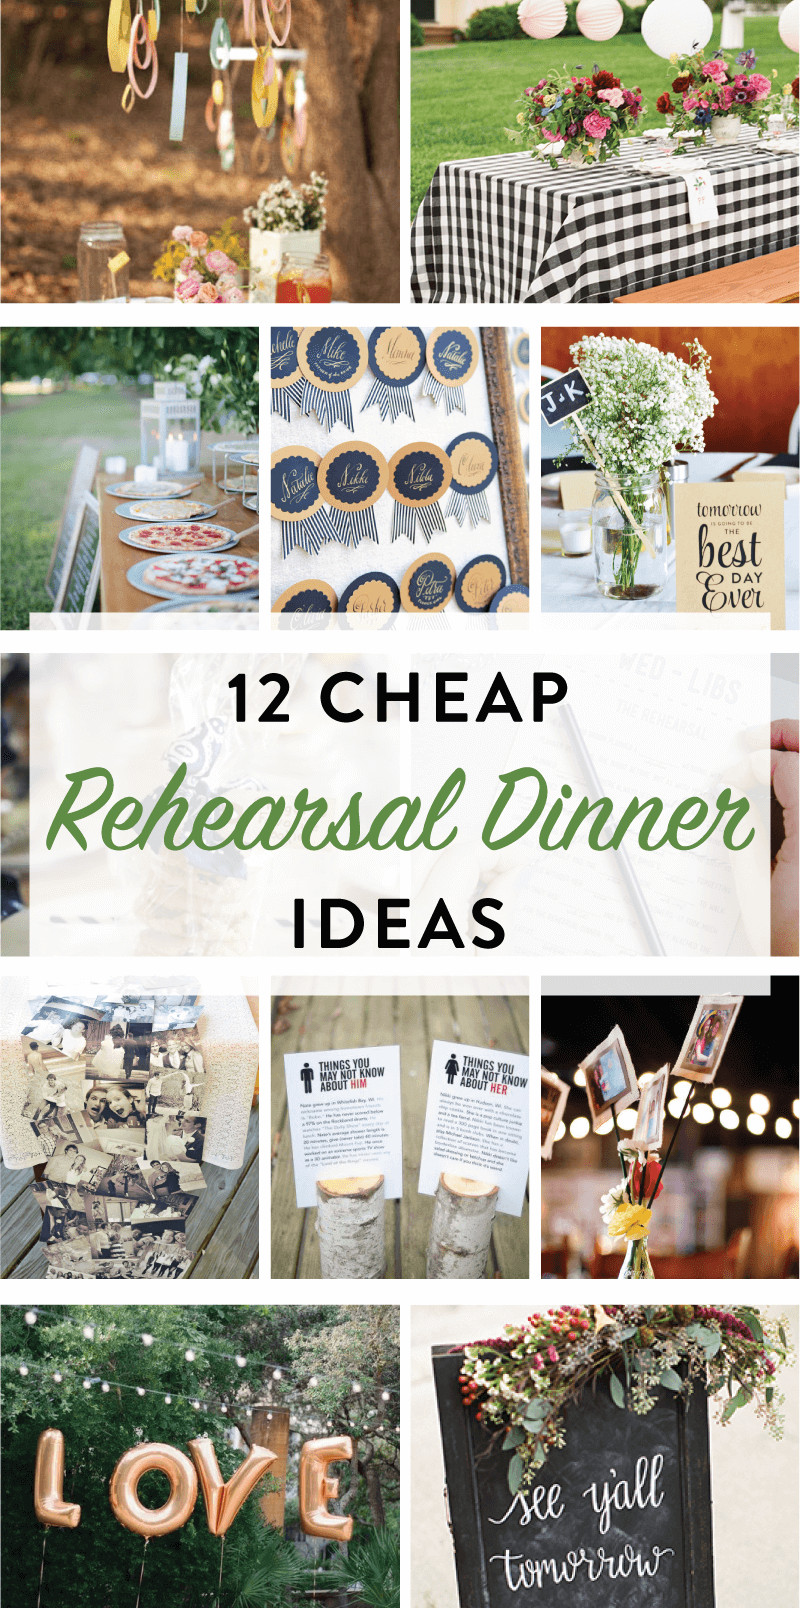 Cheap Rehersal Dinner Ideas
 10 Simple and Stunning Wedding Backdrop Ideas on Love the Day